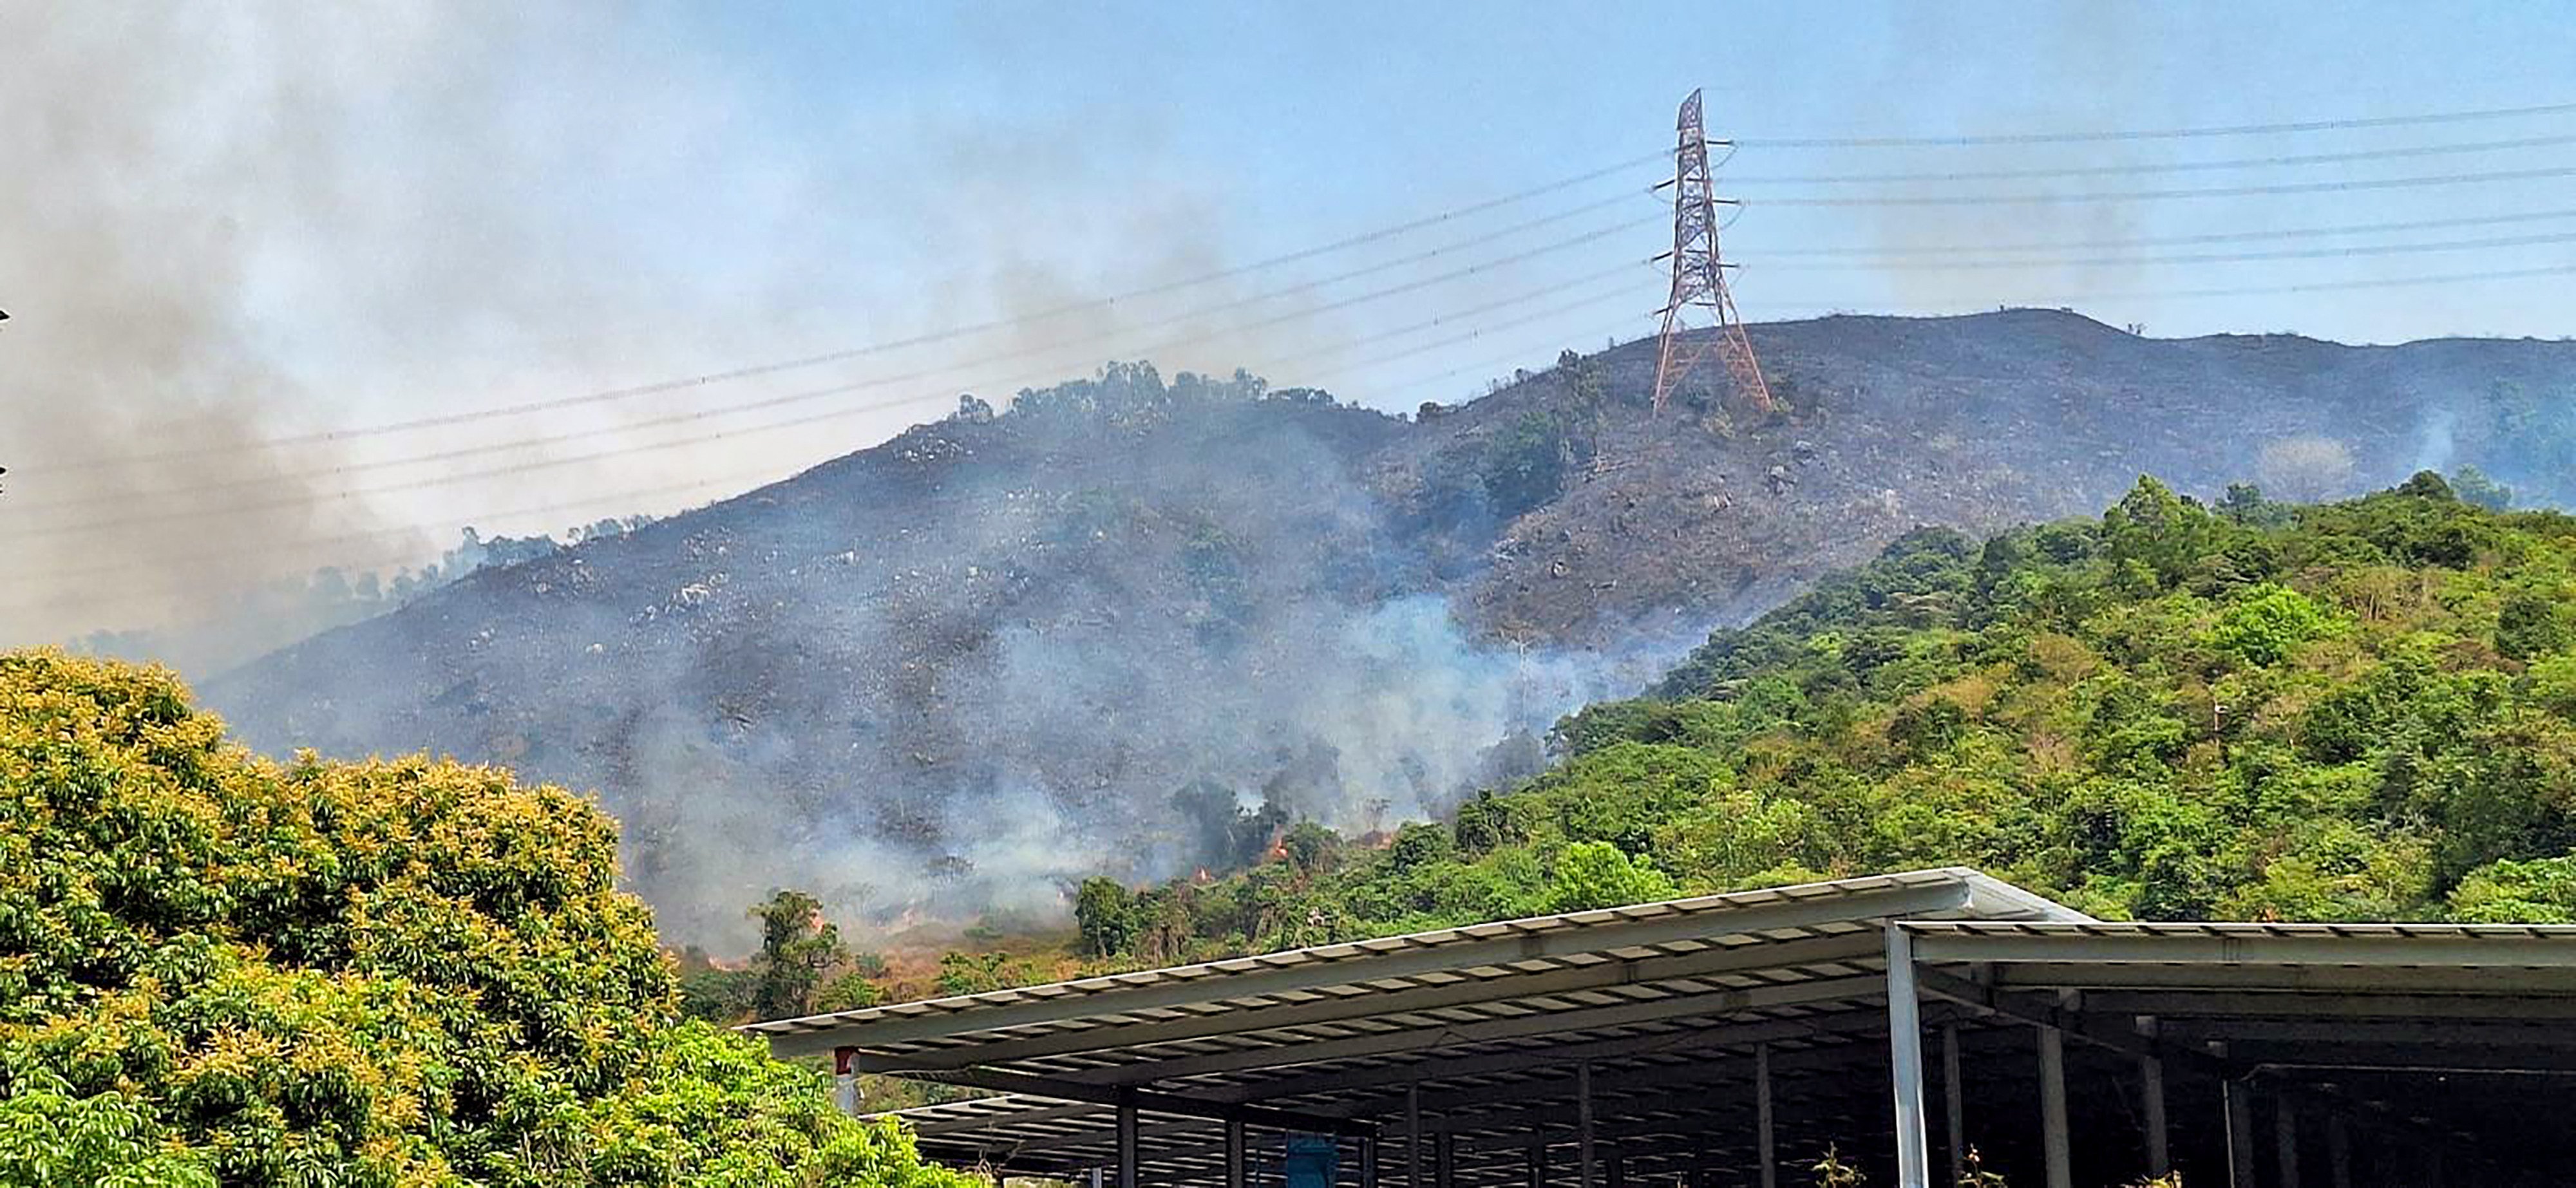 A hillfire was the cause of a CLP Power power dip in some areas of the New Territories and Kowloon earlier this year. Photo: CLP